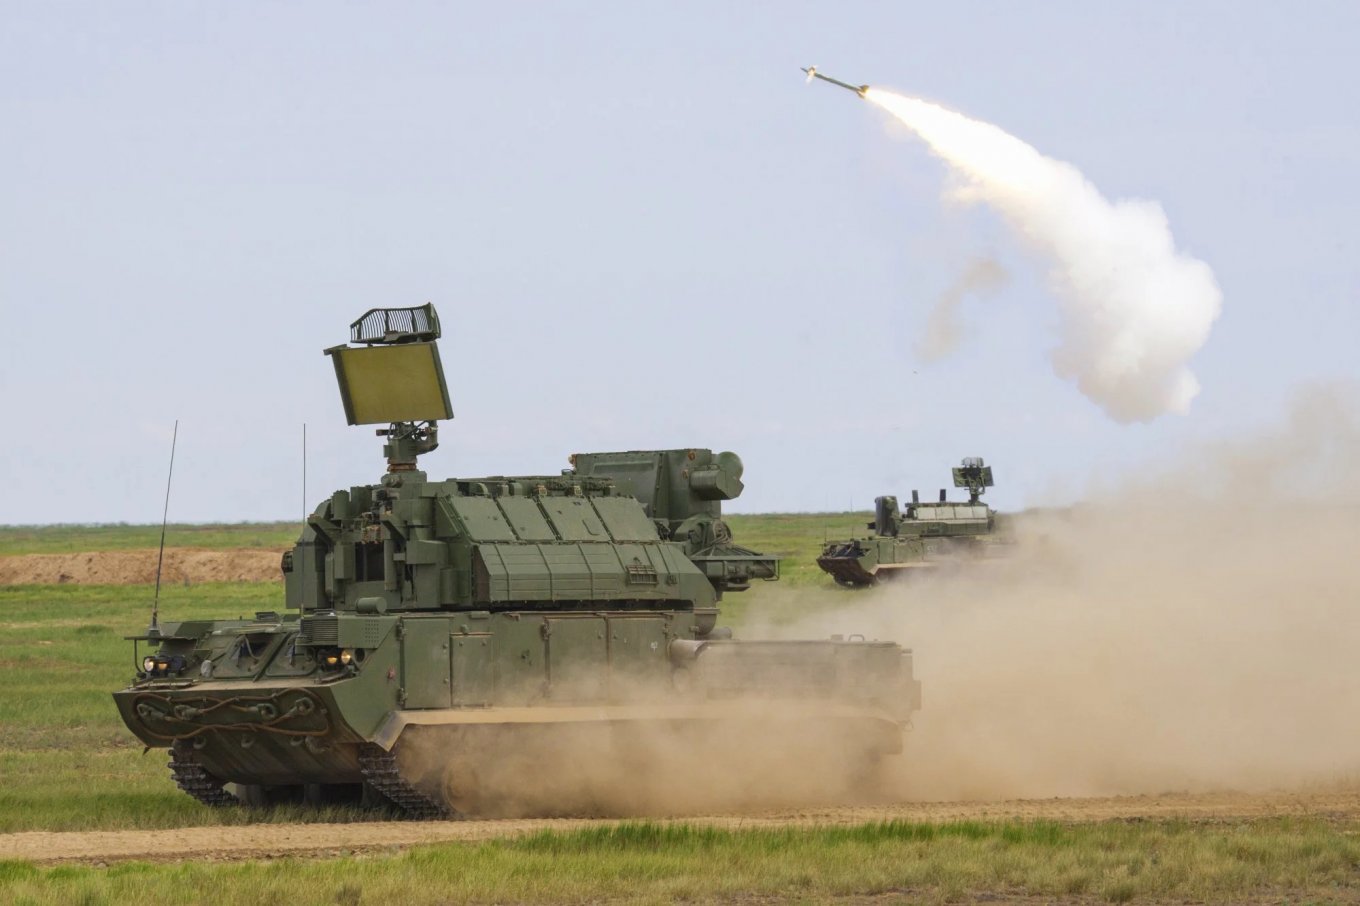 russian Tor surface-to-air missile system